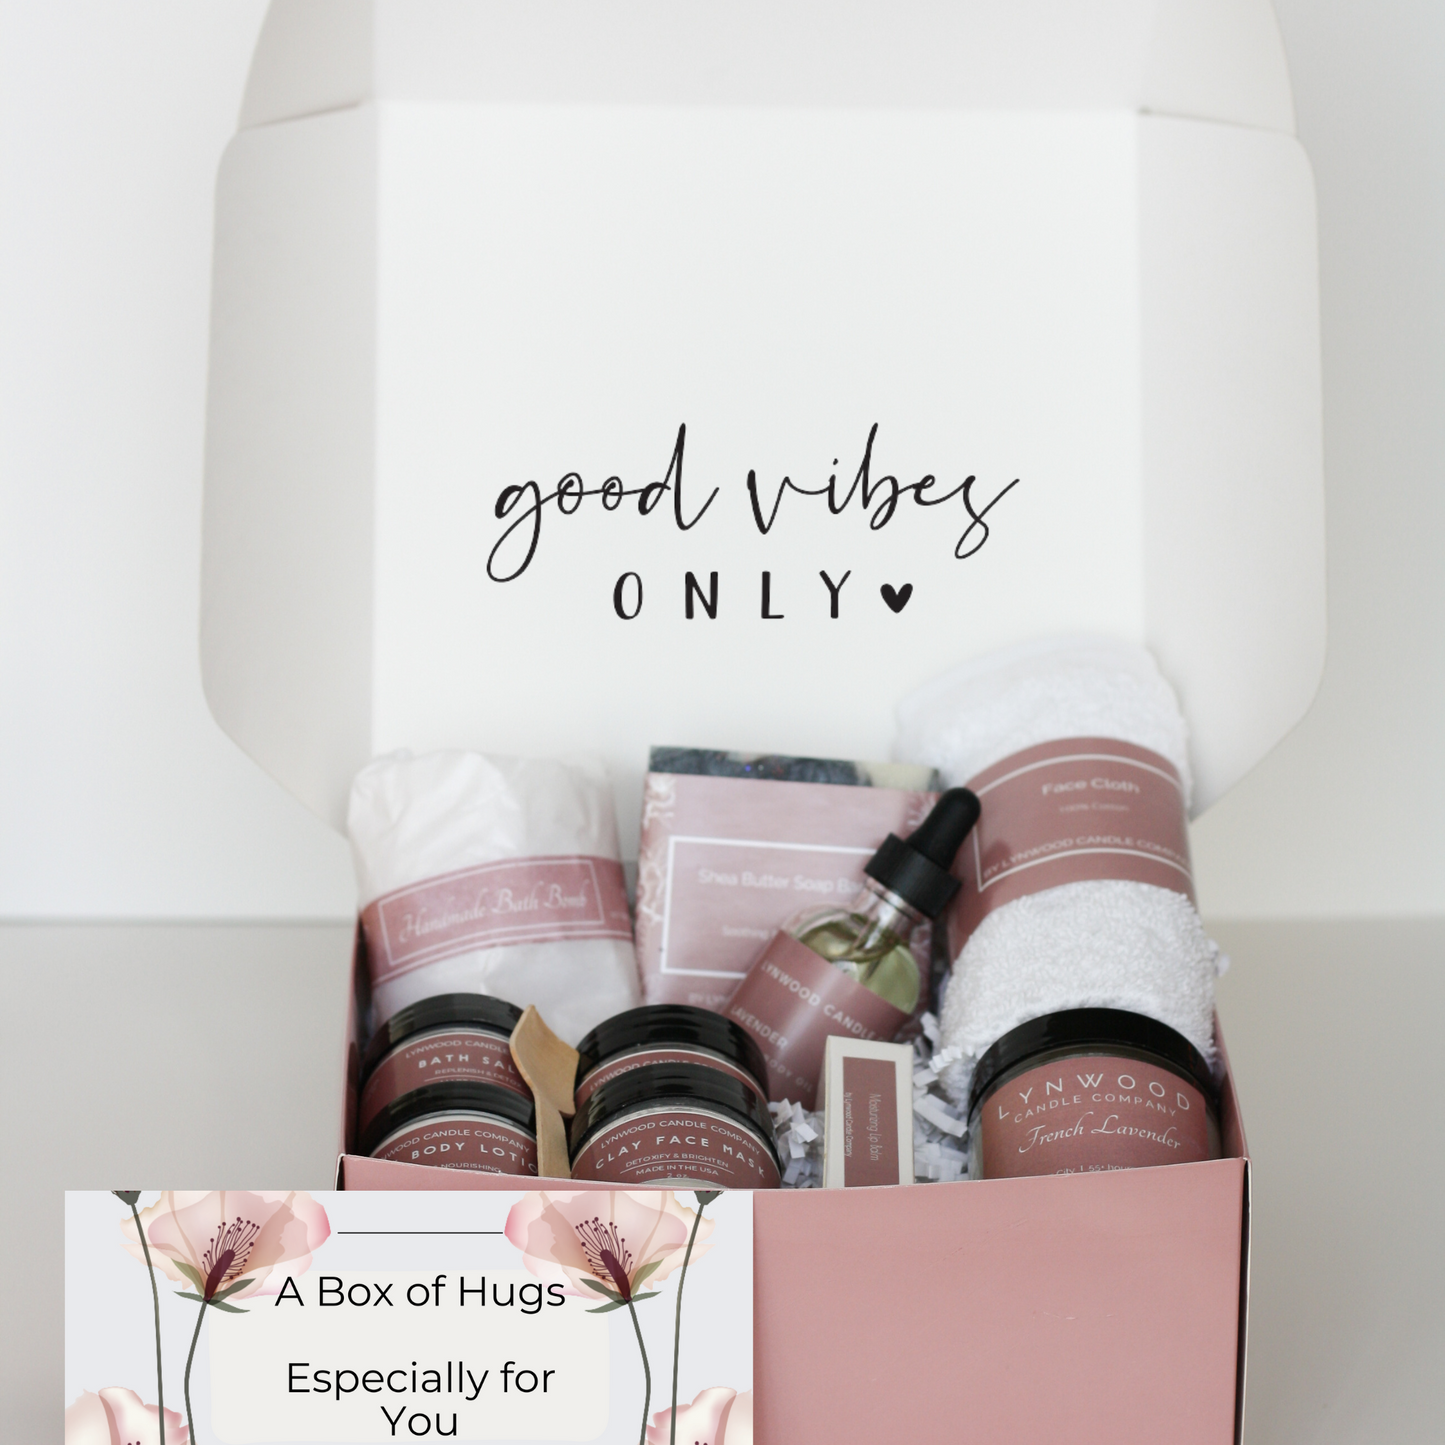 Thinking of You Gift Box: Self-Care Pampering & Cozy Treats to Send Hugs in the Mail